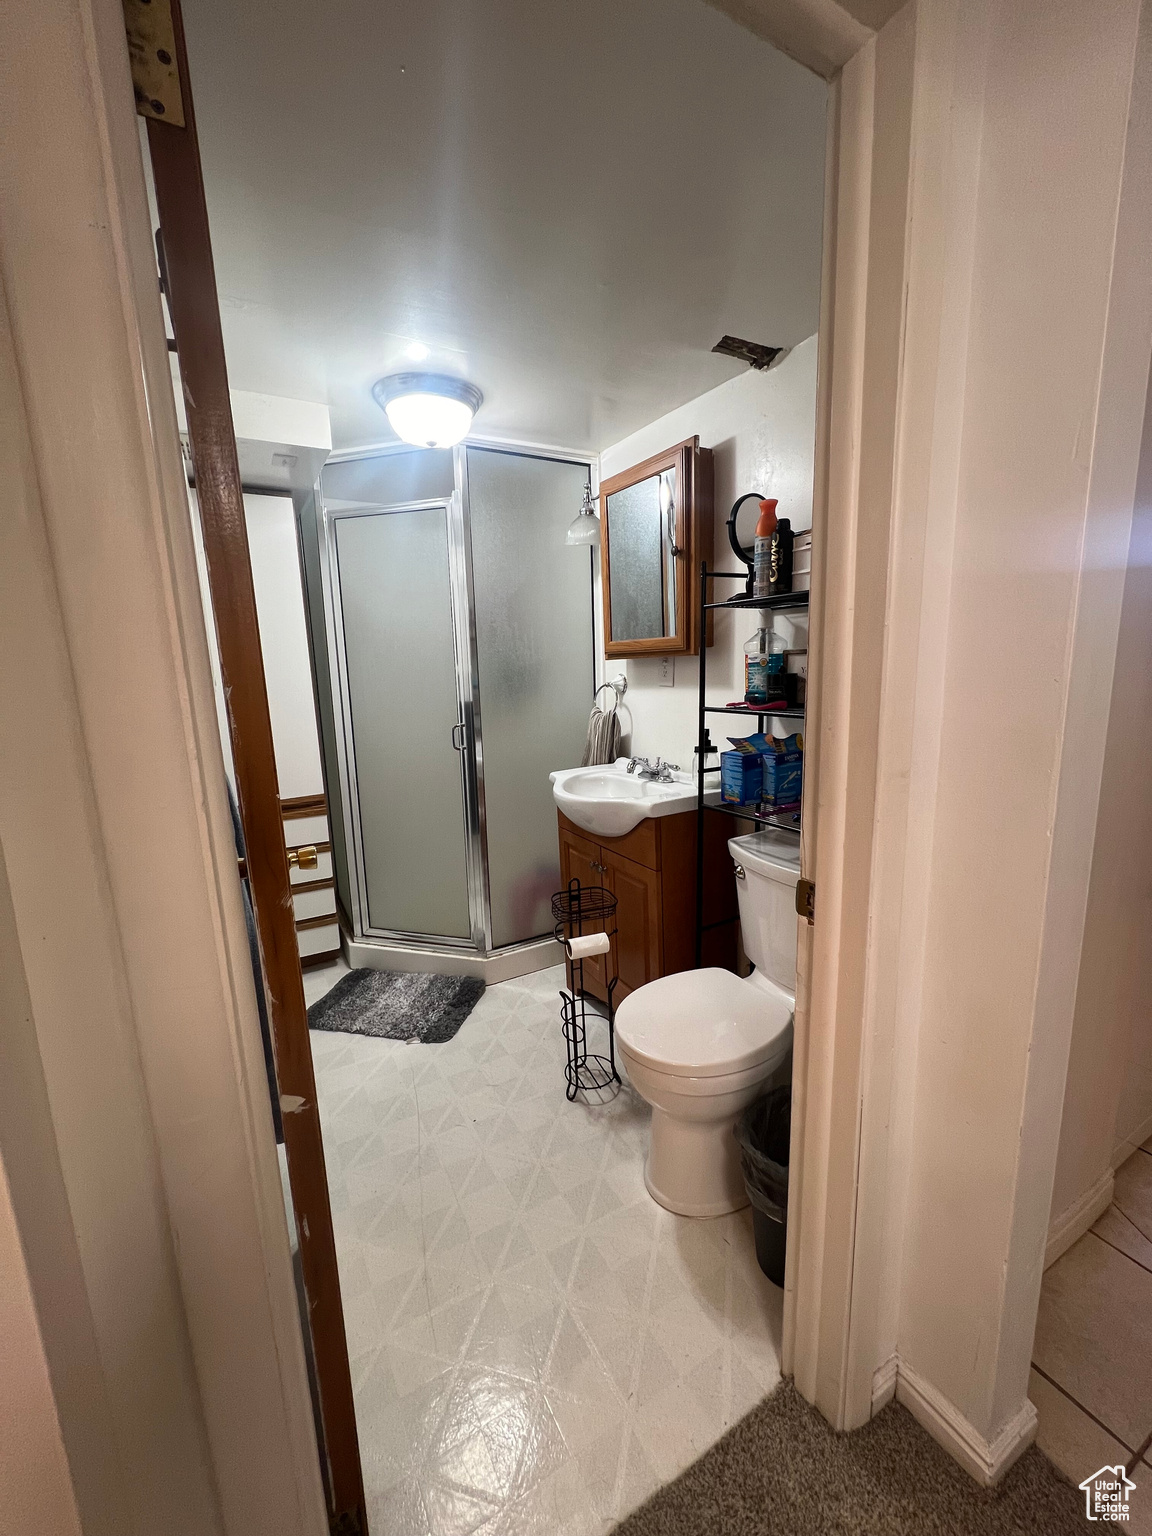 Bathroom featuring vanity, toilet, tile flooring, and an enclosed shower